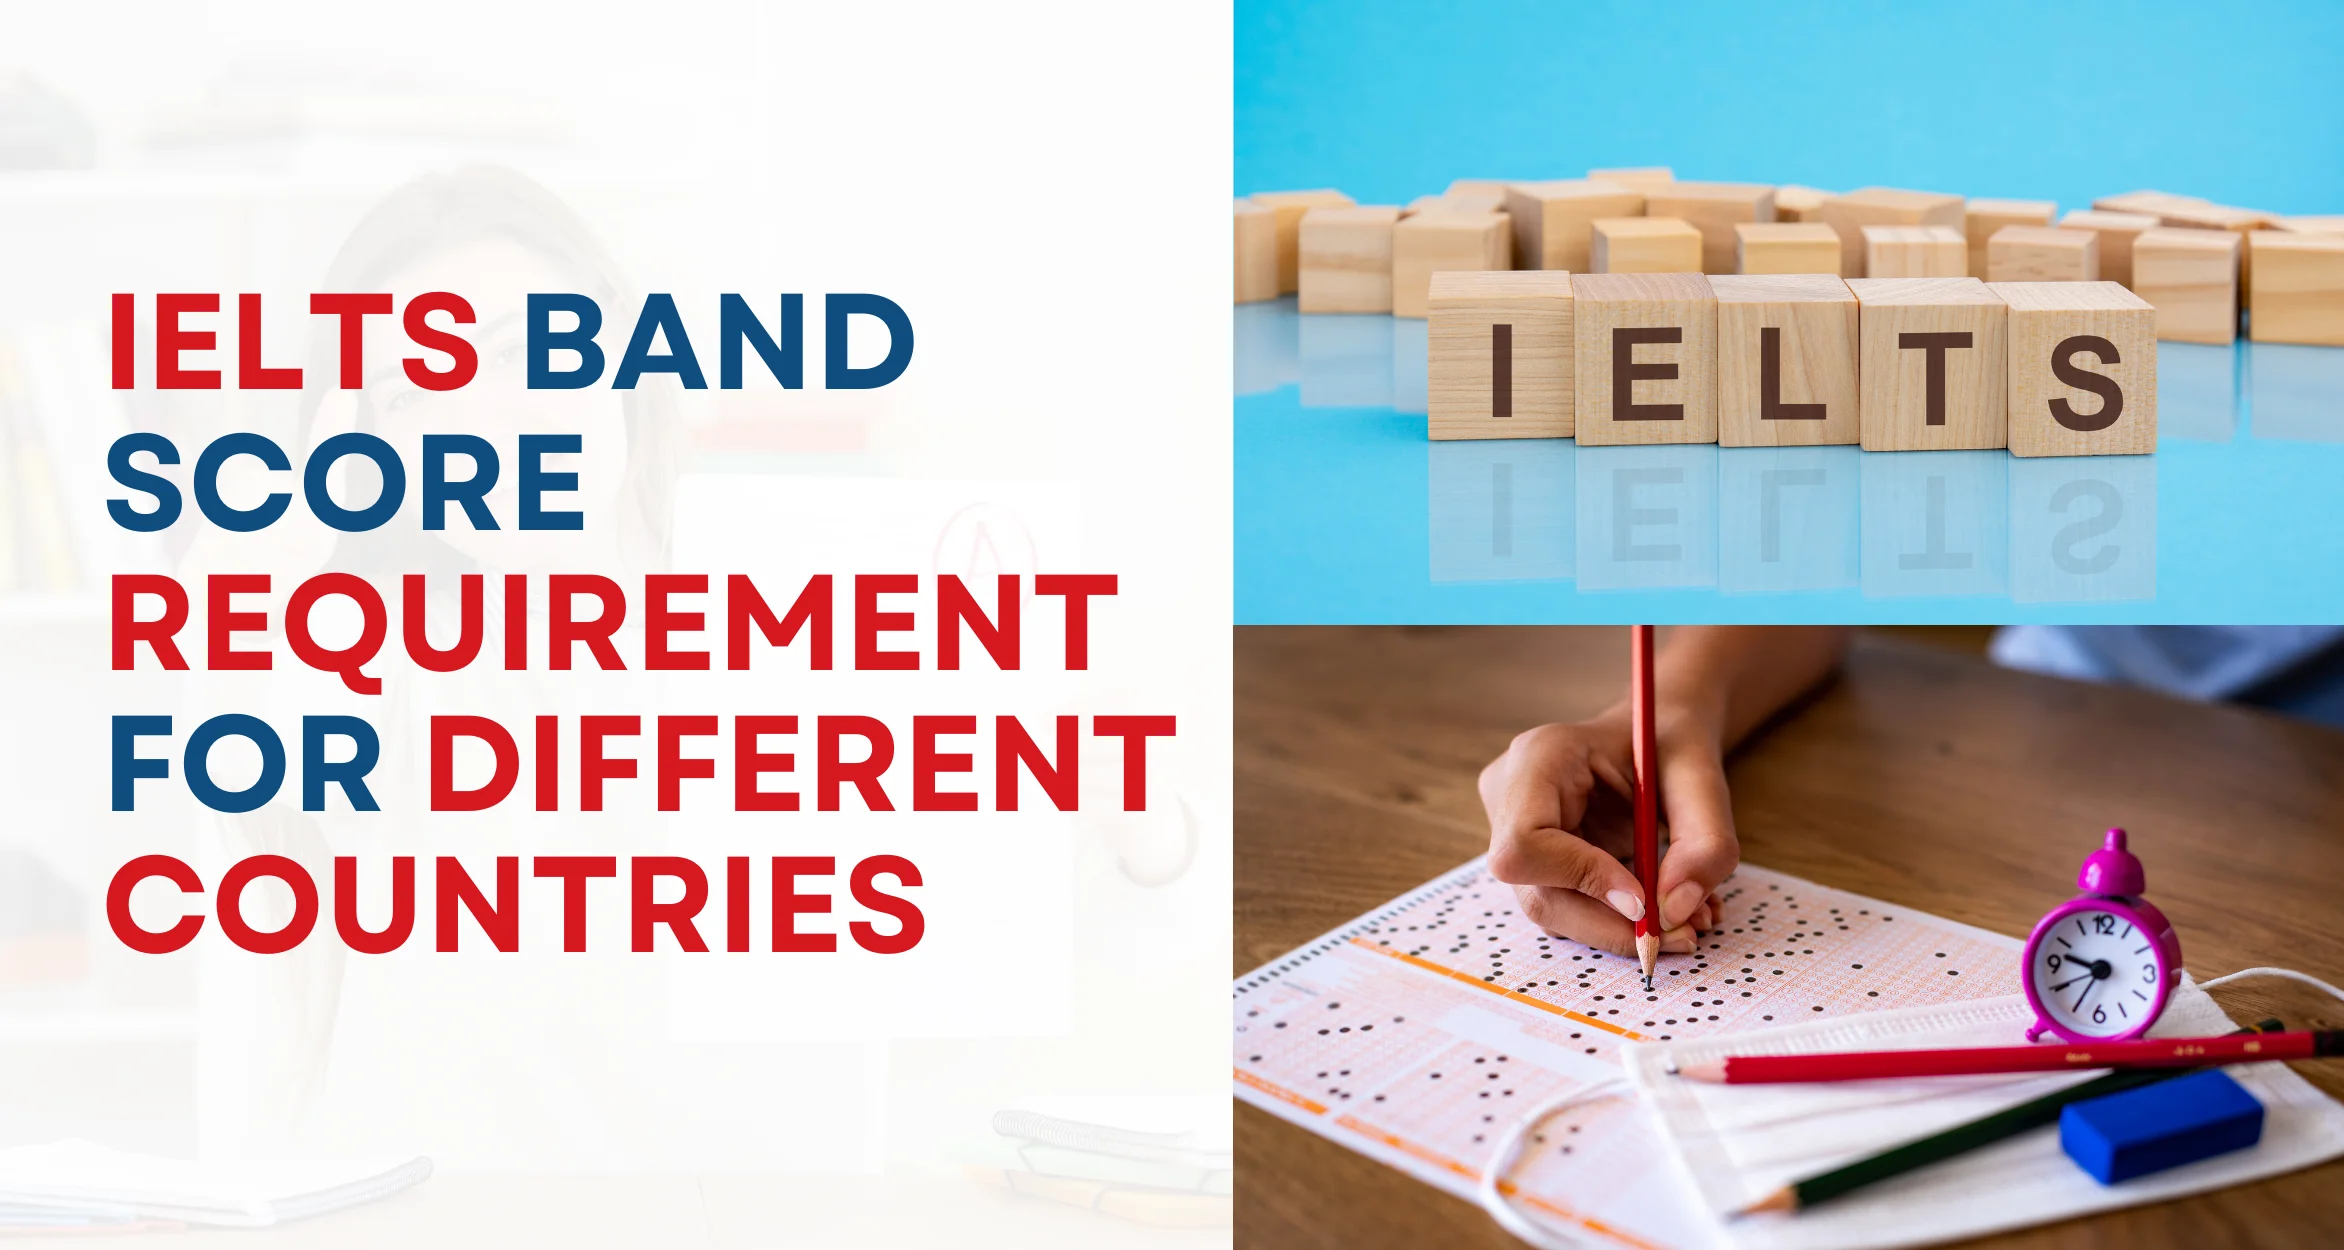 Ielts band score requirement for different countries